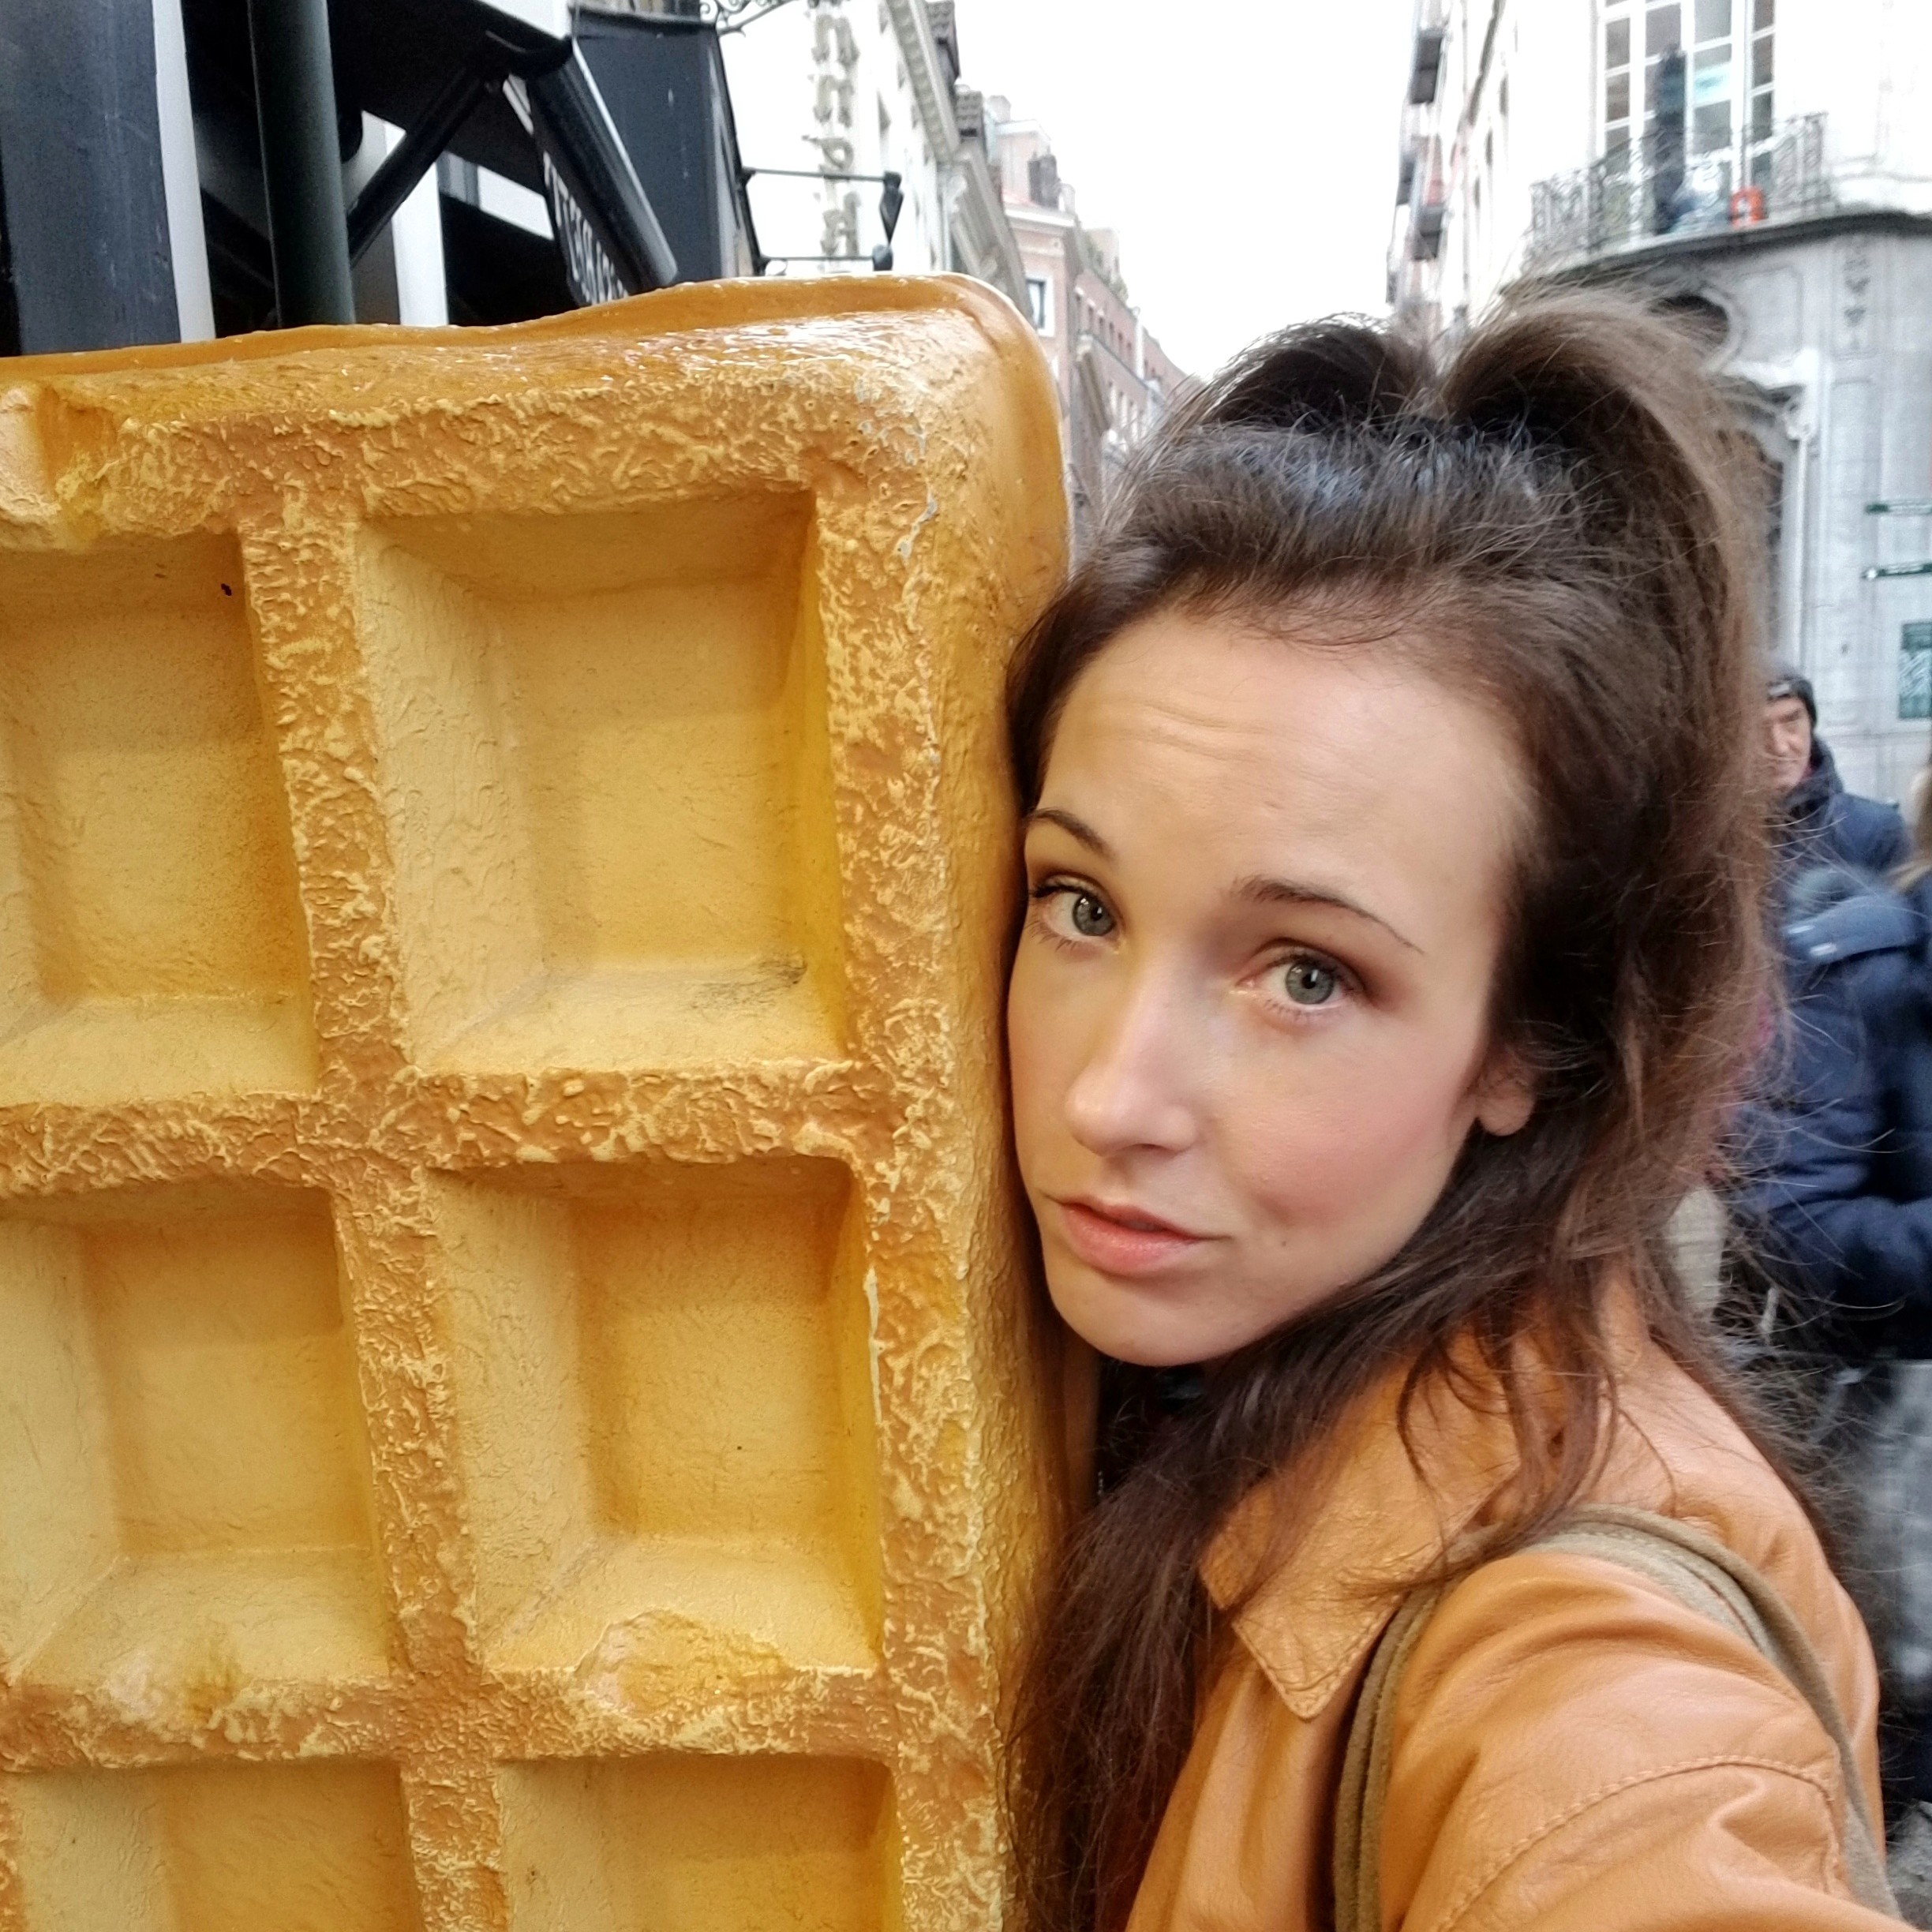 Woman posing next to a giant waffle statue